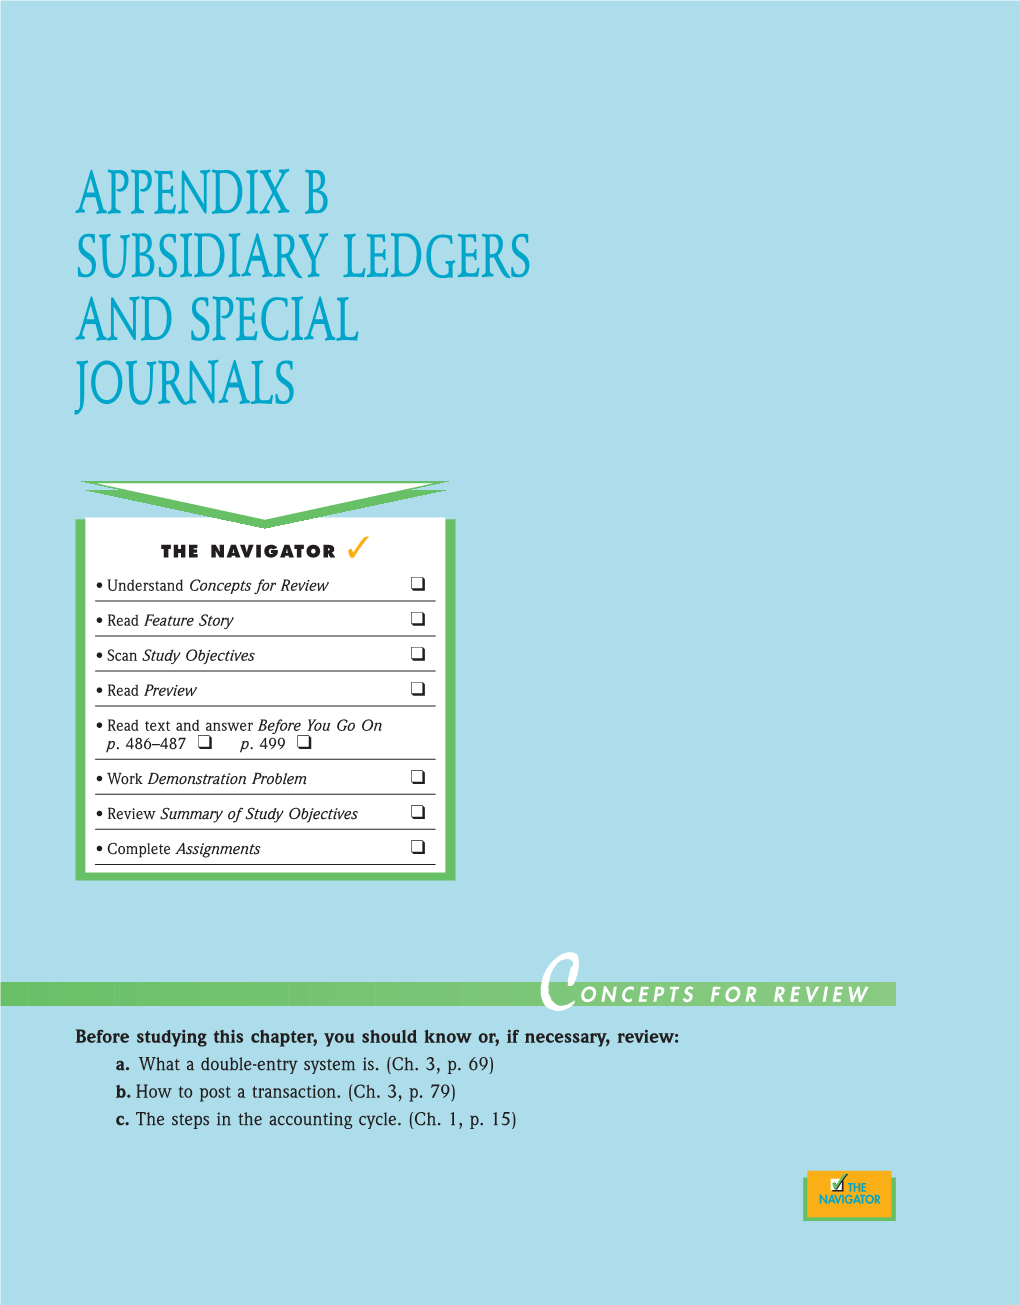 Appendix B Subsidiary Ledgers and Special Journals